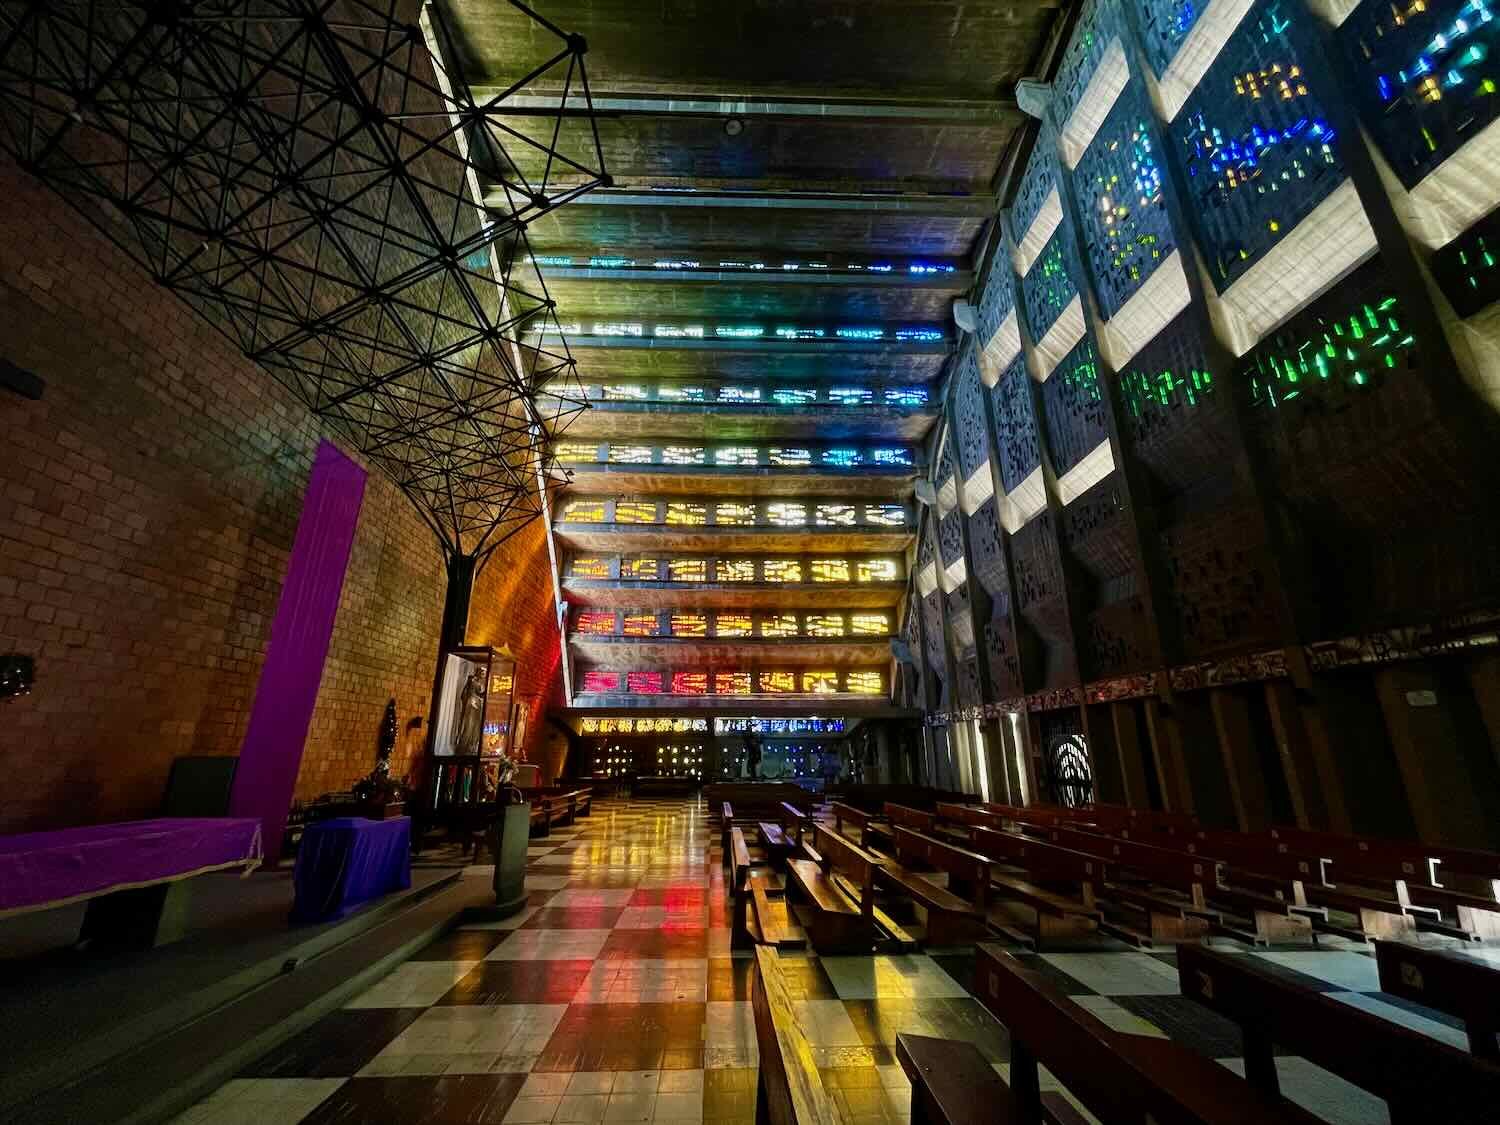 Sunlight shines through the stained glass in the terraced roof of the El Rosario Church in a dappled rainbow